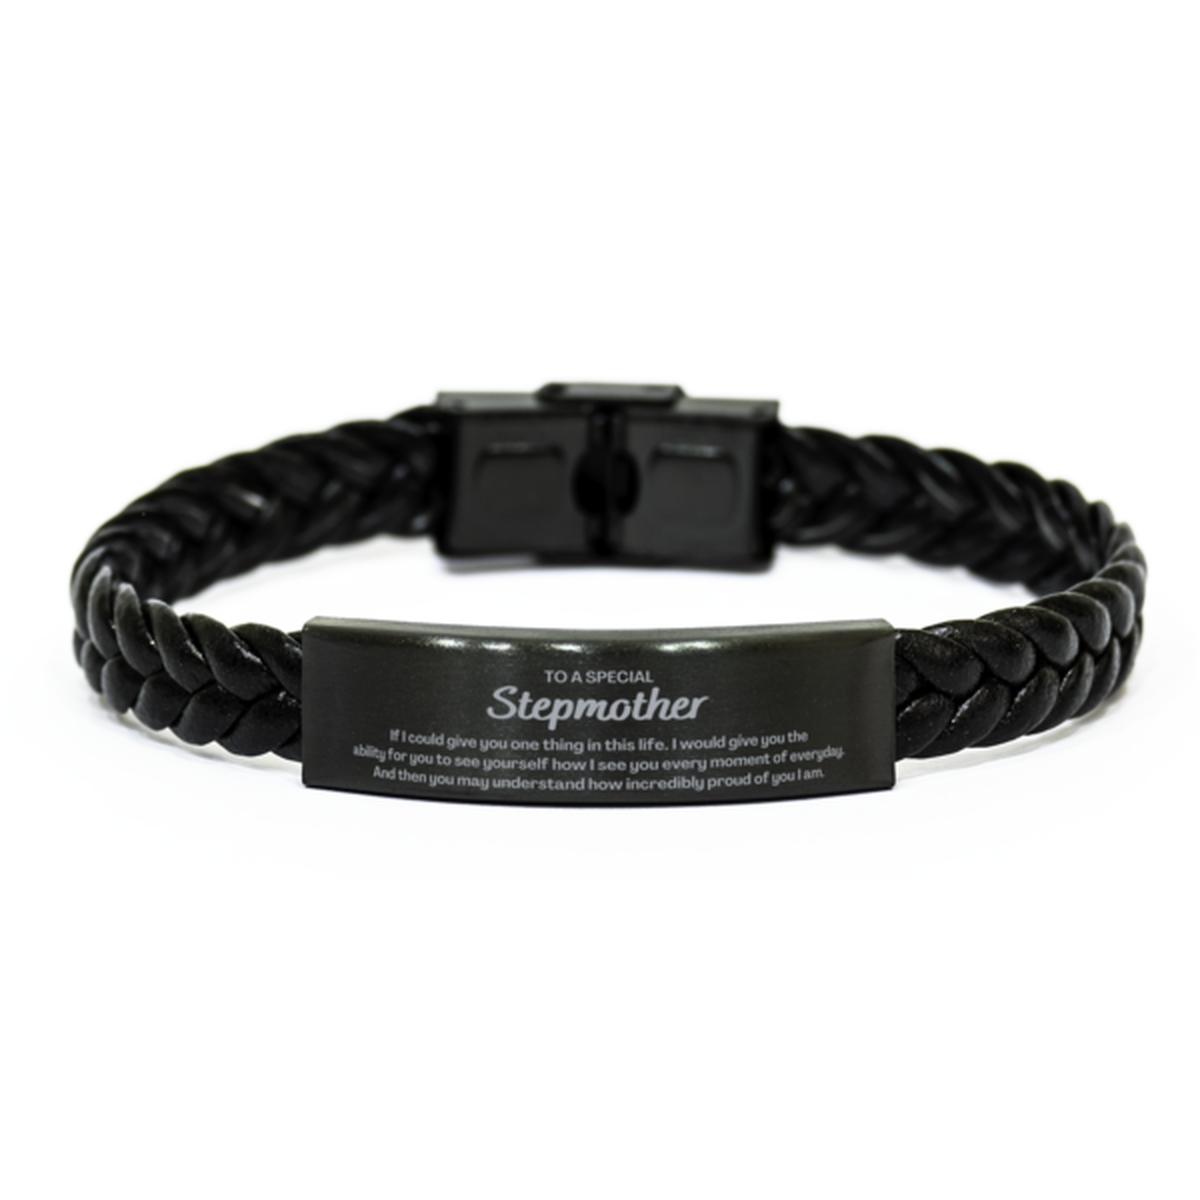 To My Stepmother Braided Leather Bracelet, Gifts For Stepmother Engraved, Inspirational Gifts for Christmas Birthday, Epic Gifts for Stepmother To A Special Stepmother how incredibly proud of you I am